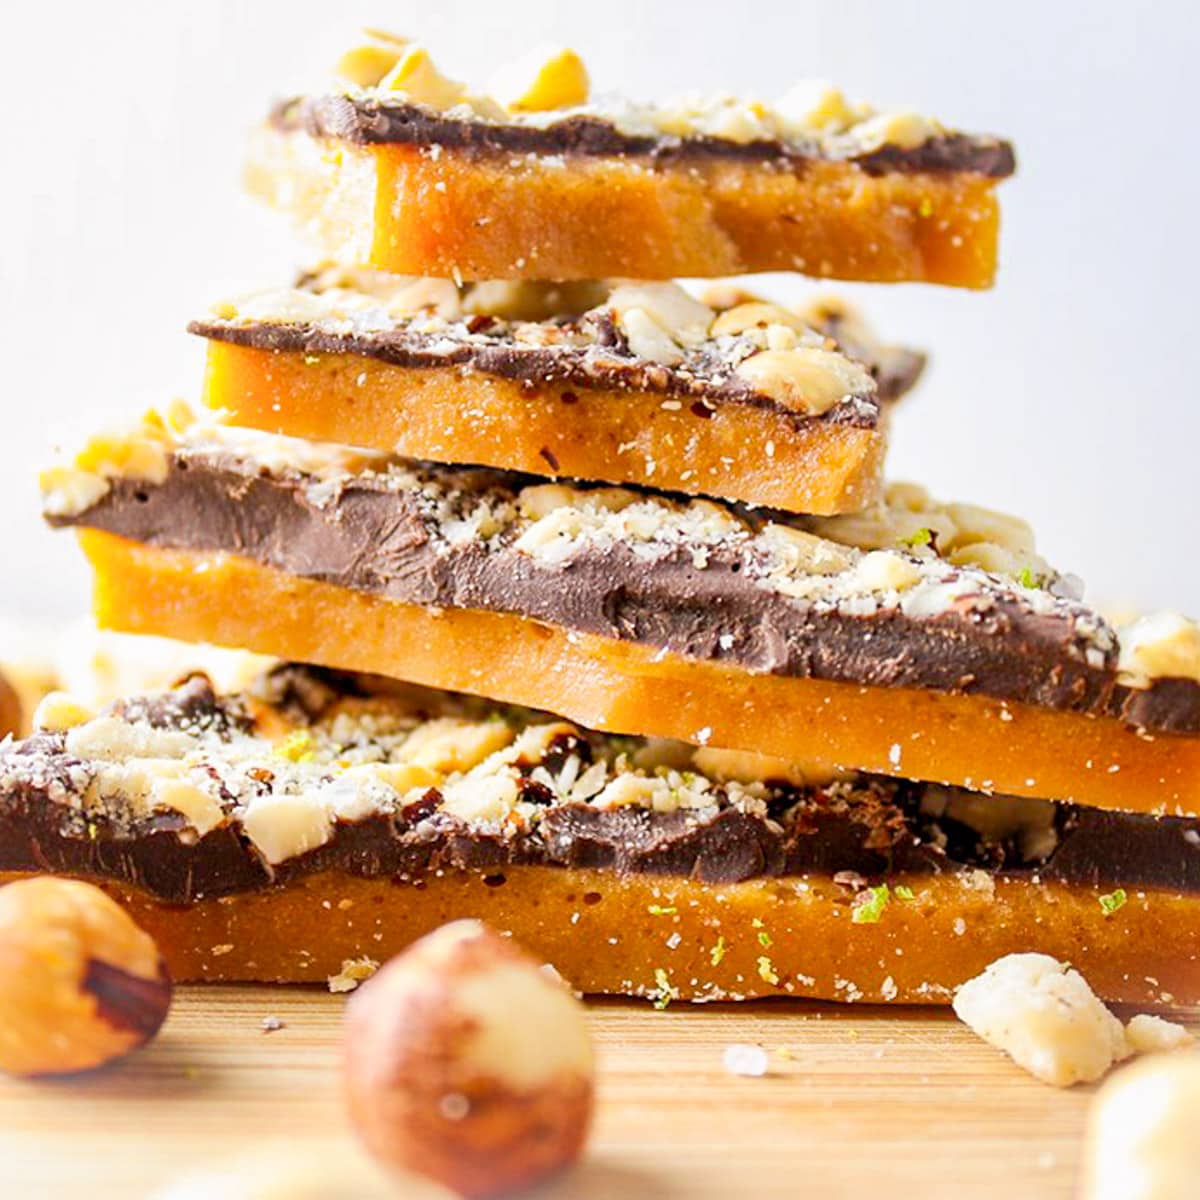 stacked pieces of chocolate covered toffee with hazelnuts on cutting board.